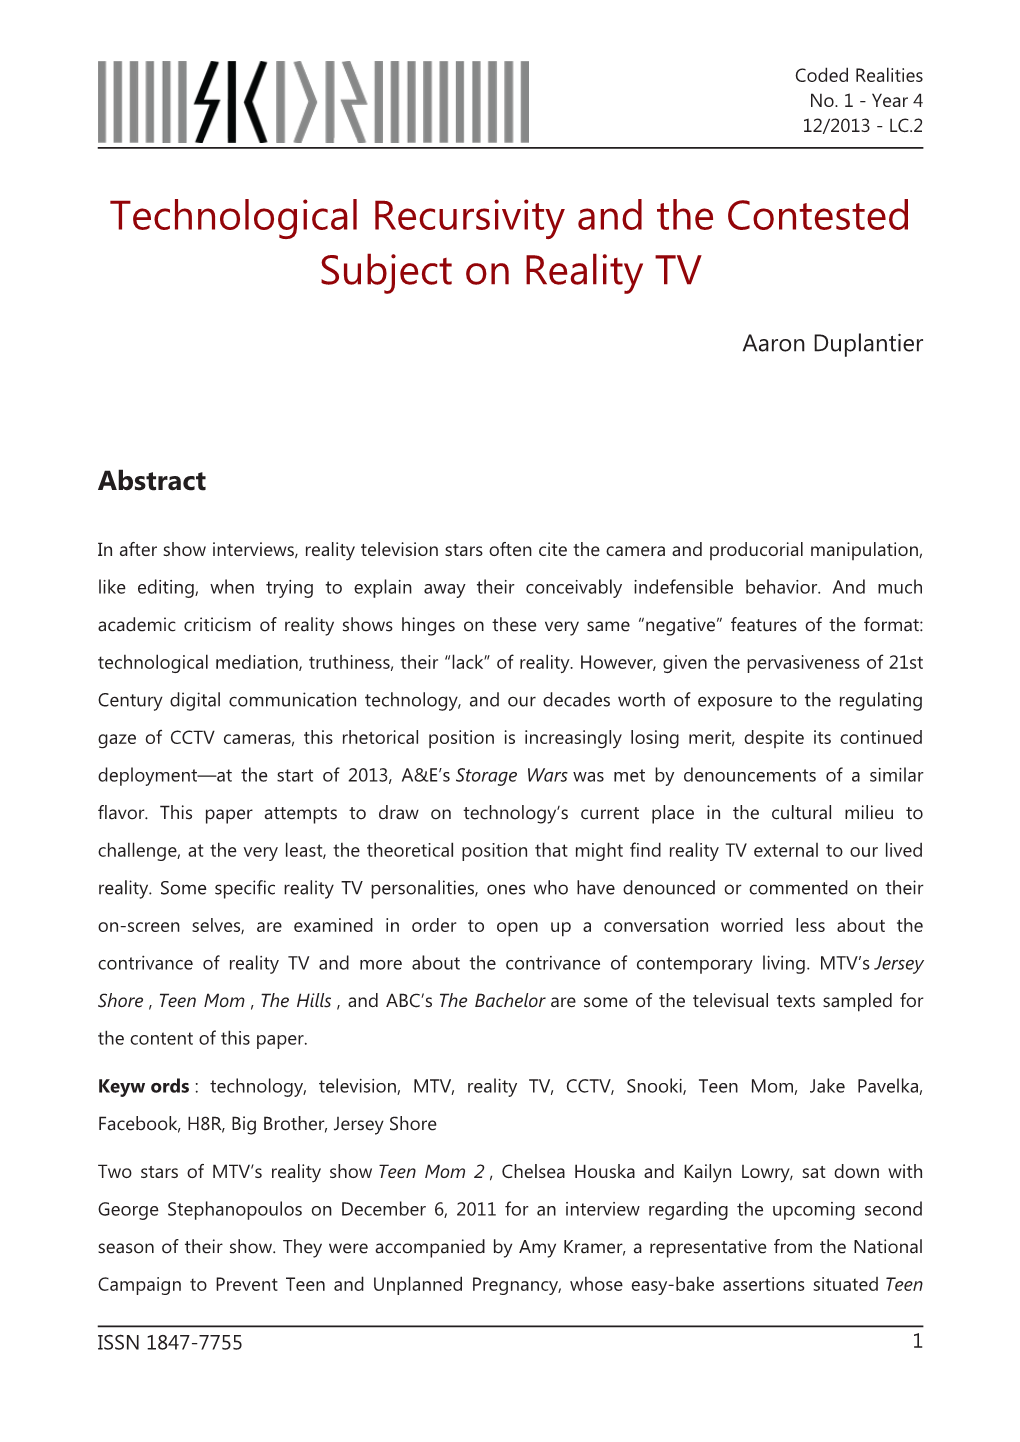 Technological Recursivity and the Contested Subject on Reality TV